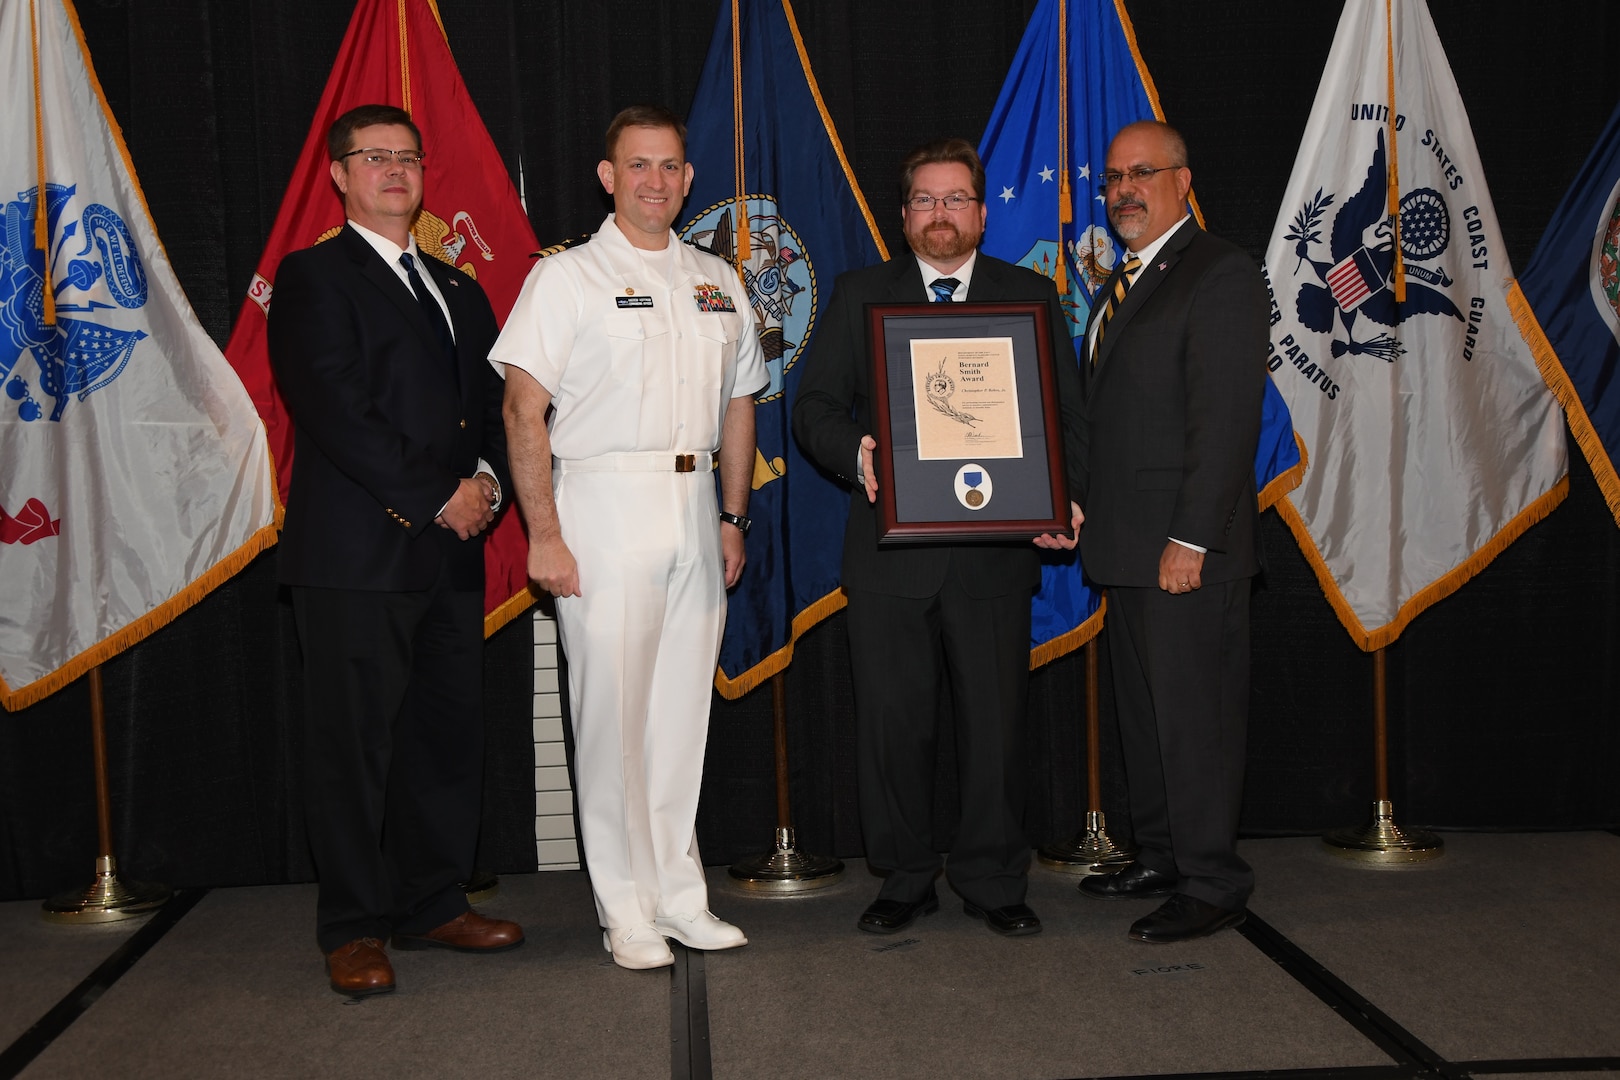 IMAGE:Christopher Behre is presented the Bernard Smith Award at Naval Surface Warfare Center Dahlgren Division's annual awards ceremony, Apr. 26 at the Fredericksburg Expo and Conference Center.